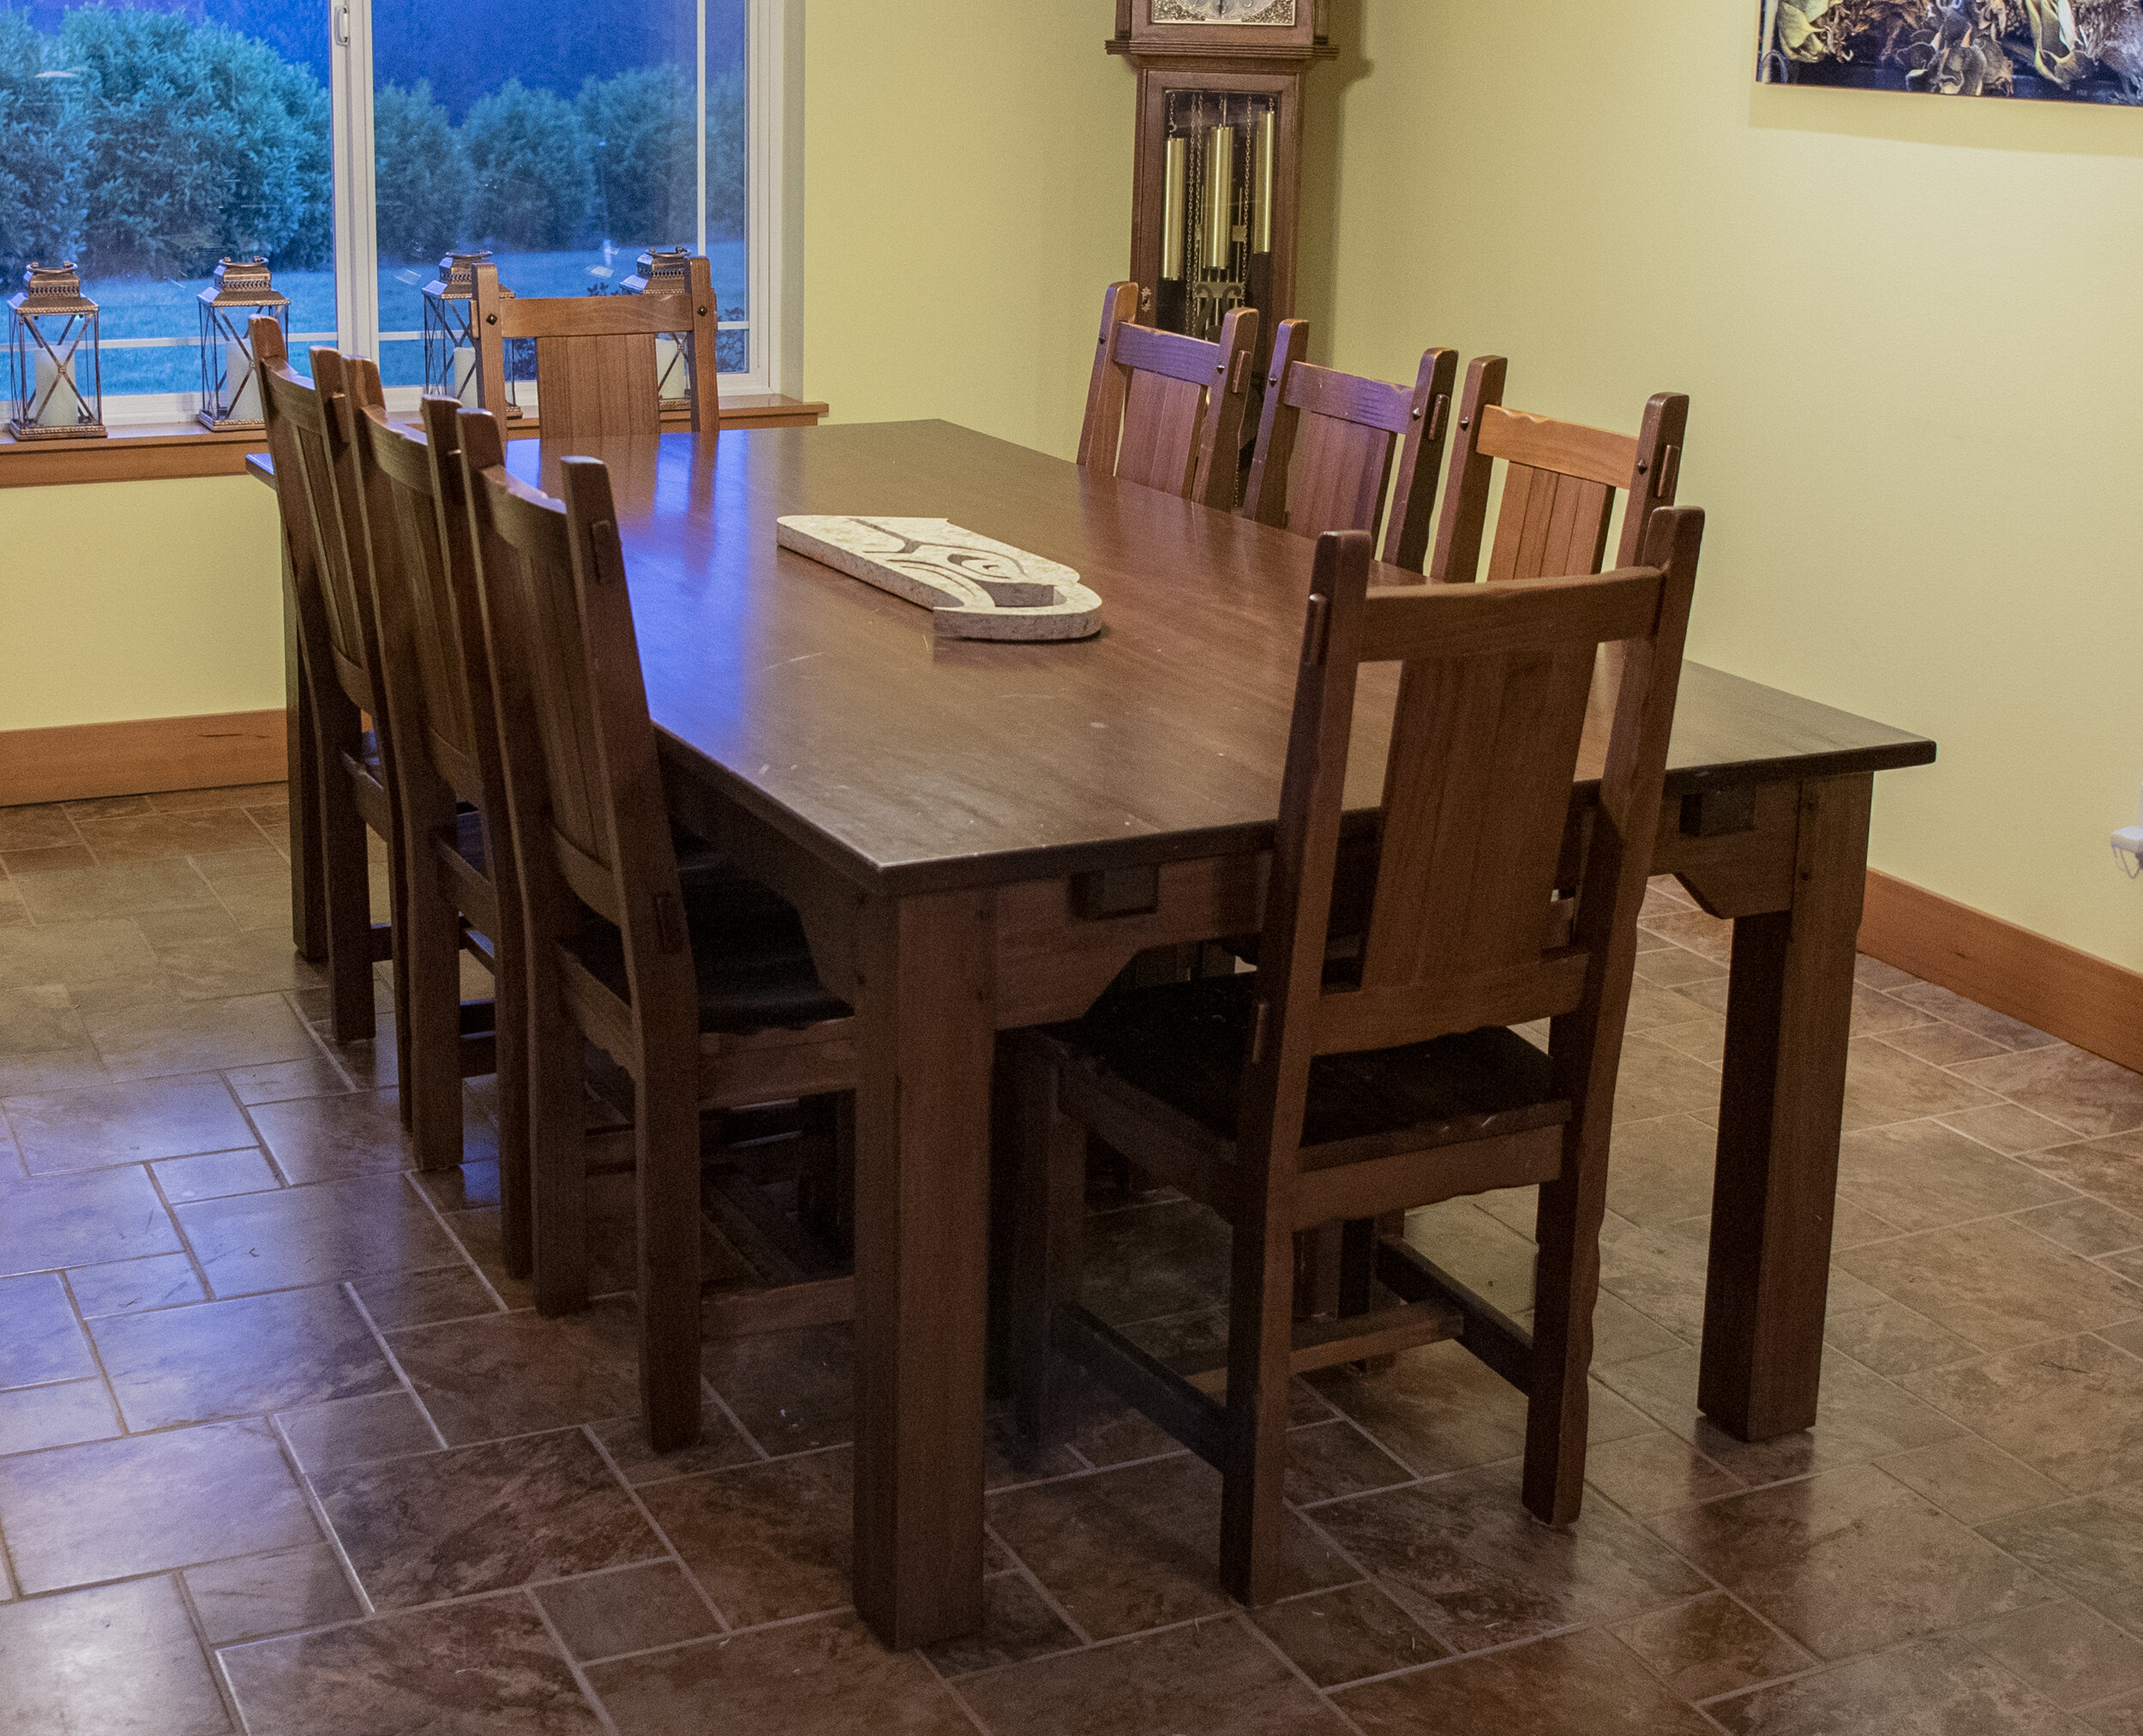 DINING ROOM TABLE